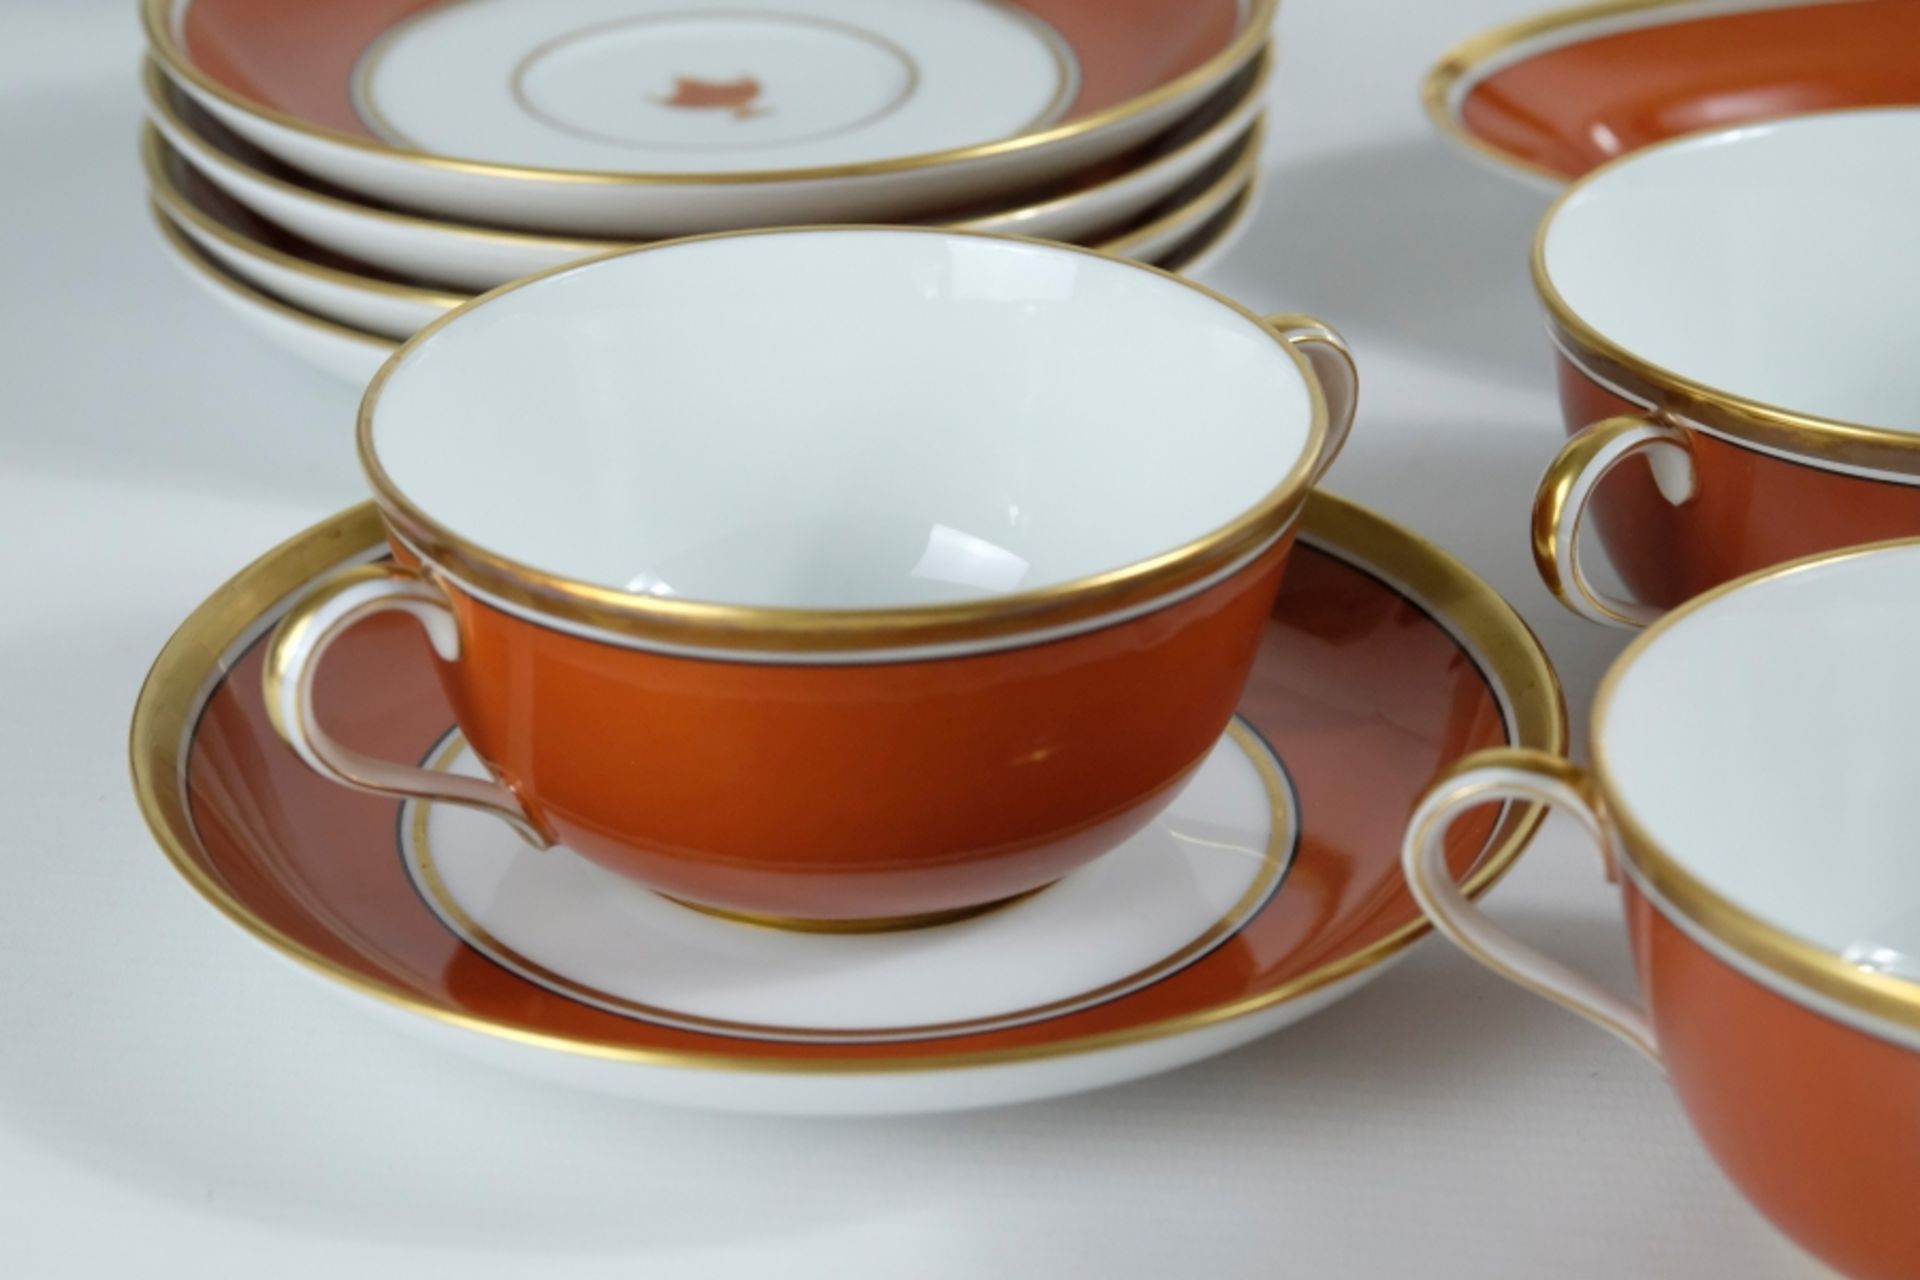 Richard Ginori "Contessa" dinner service, porcelain, white and terracotta with gold rim, consisting - Image 5 of 8